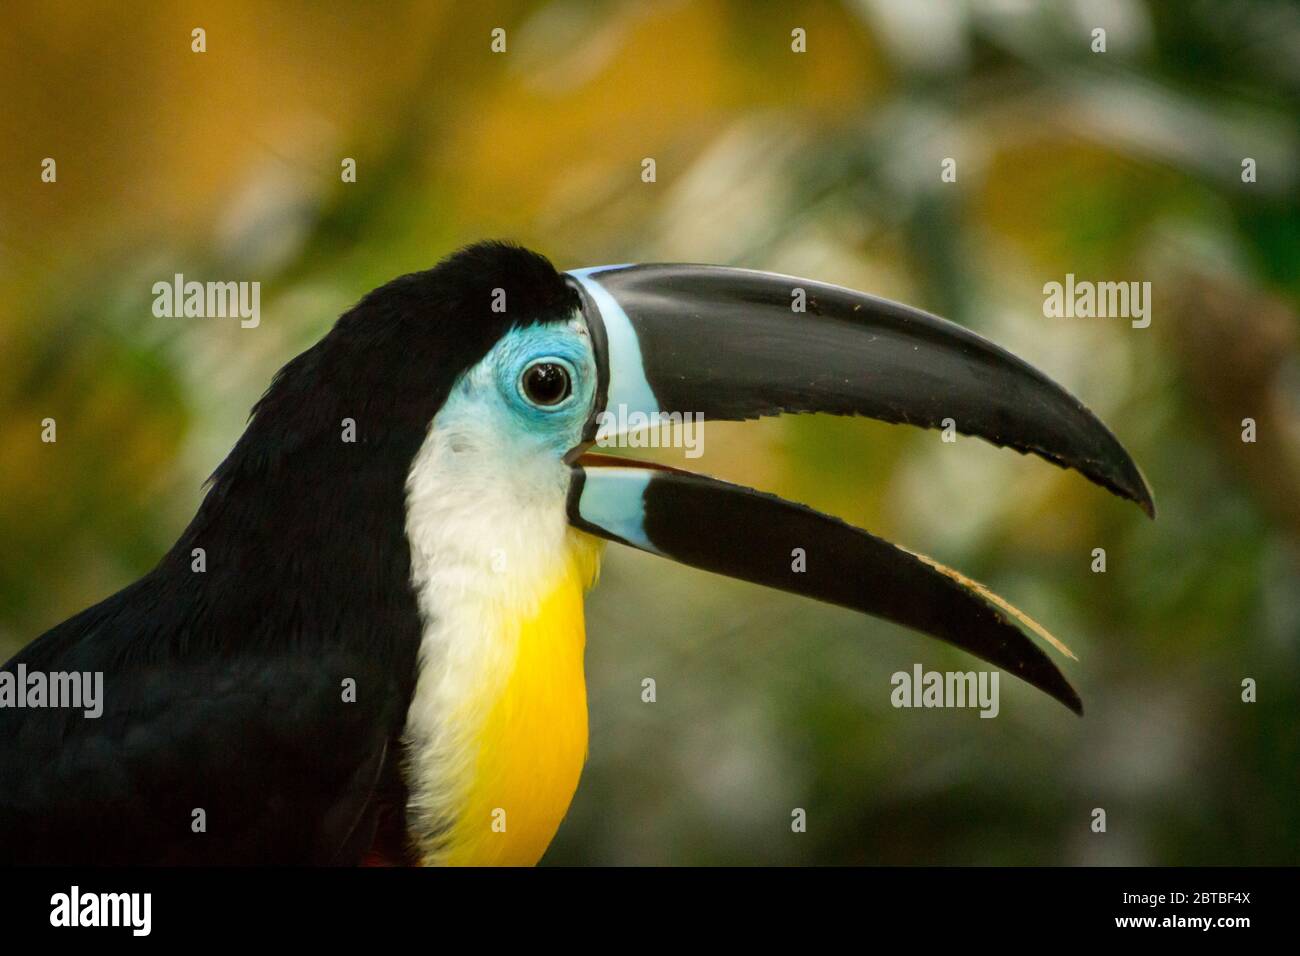 A citron-throated Channel-billed toucan (Ramphastos vitellinus) native to South American tropical jungles. Stock Photo